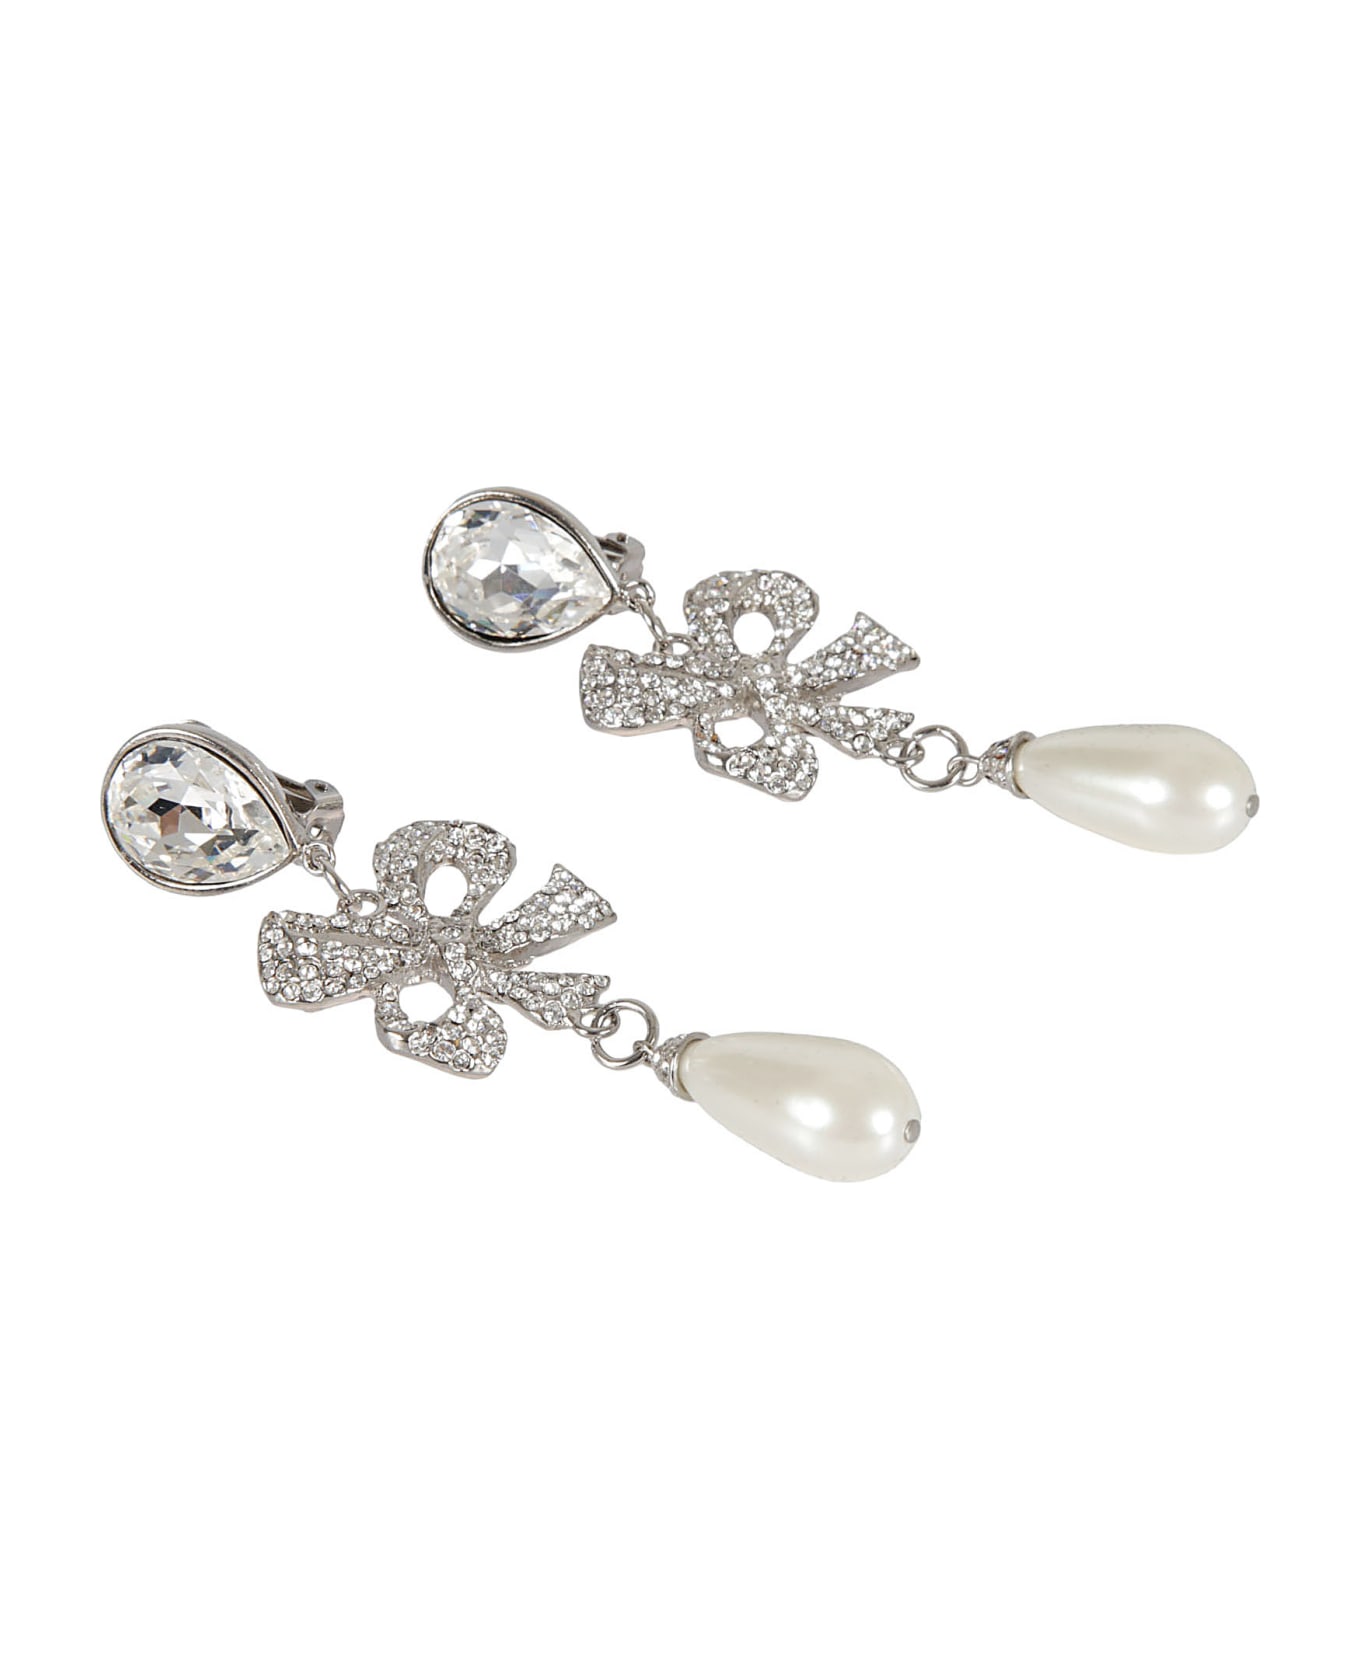 Alessandra Rich Diamond & Pearl Embellished Earrings - Cry Silver イヤリング